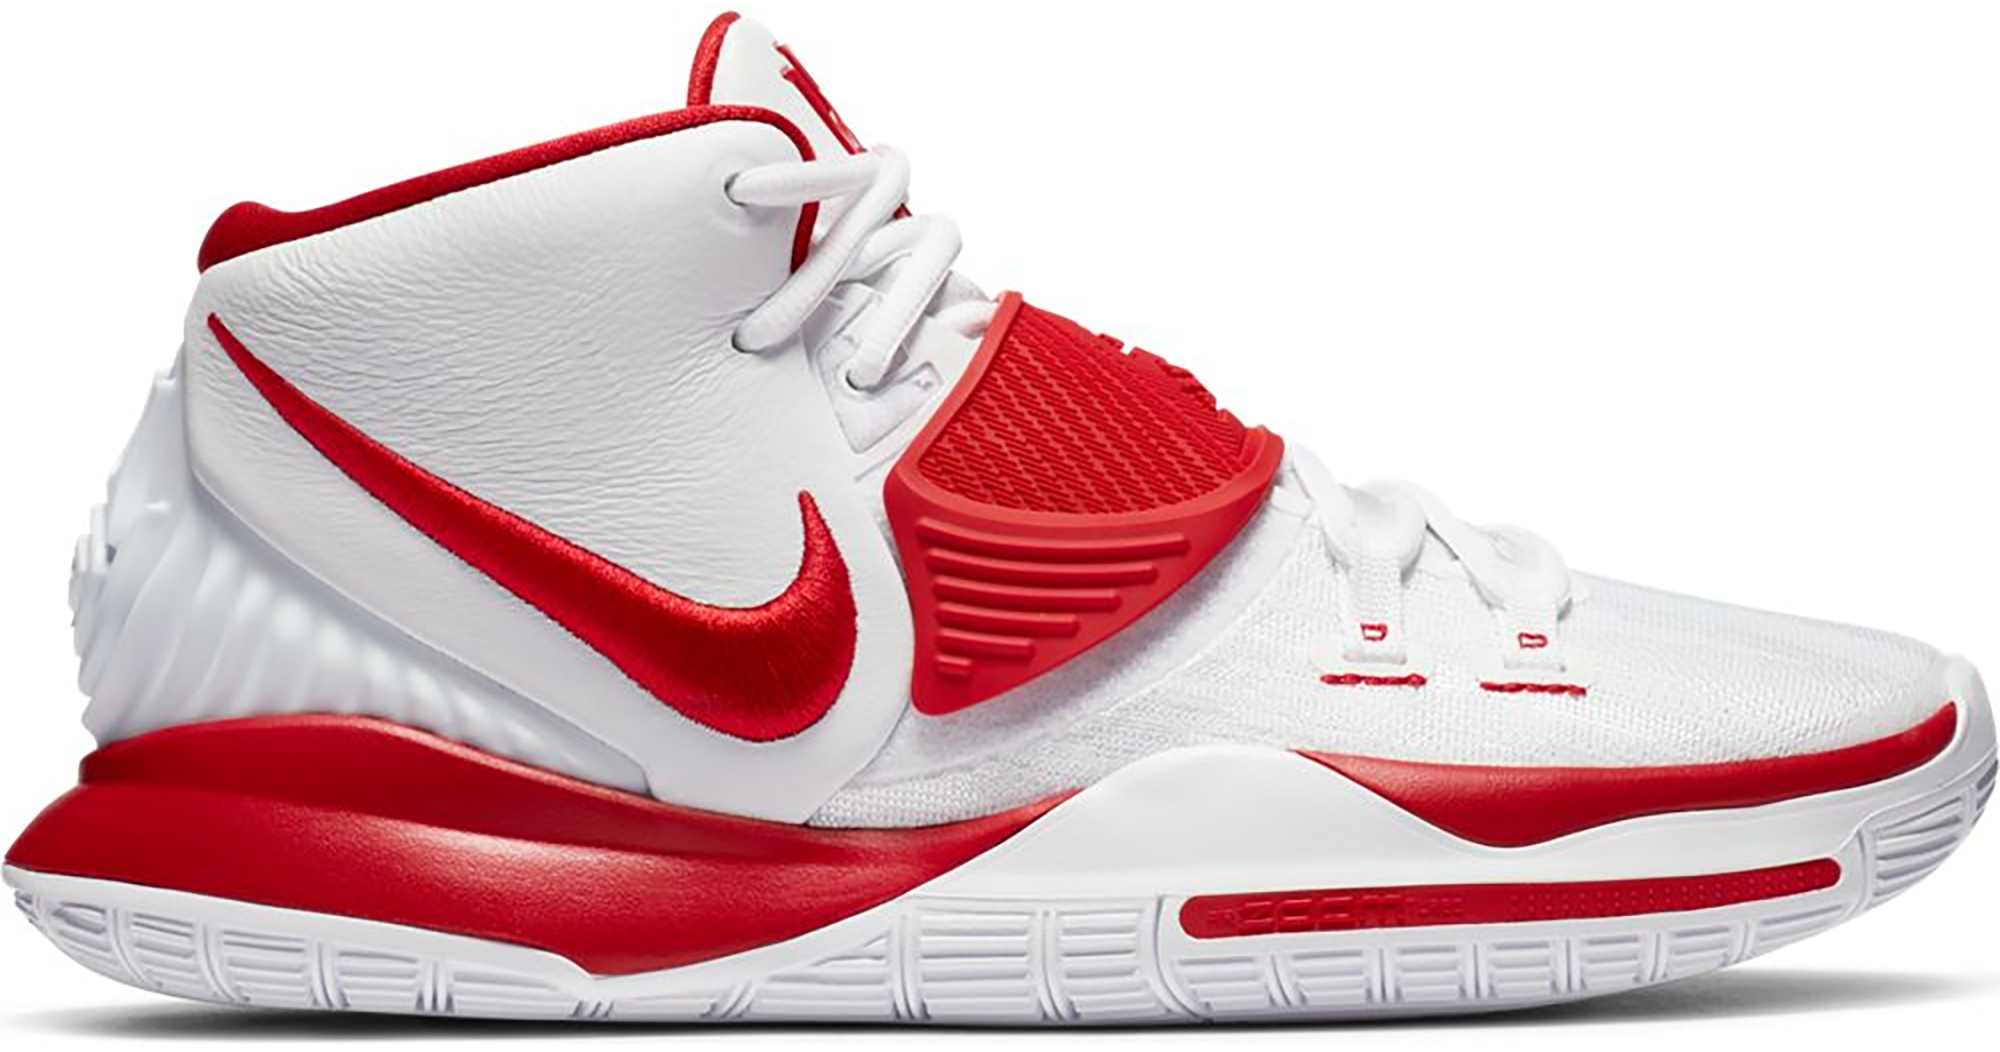 kyrie 6 red and white